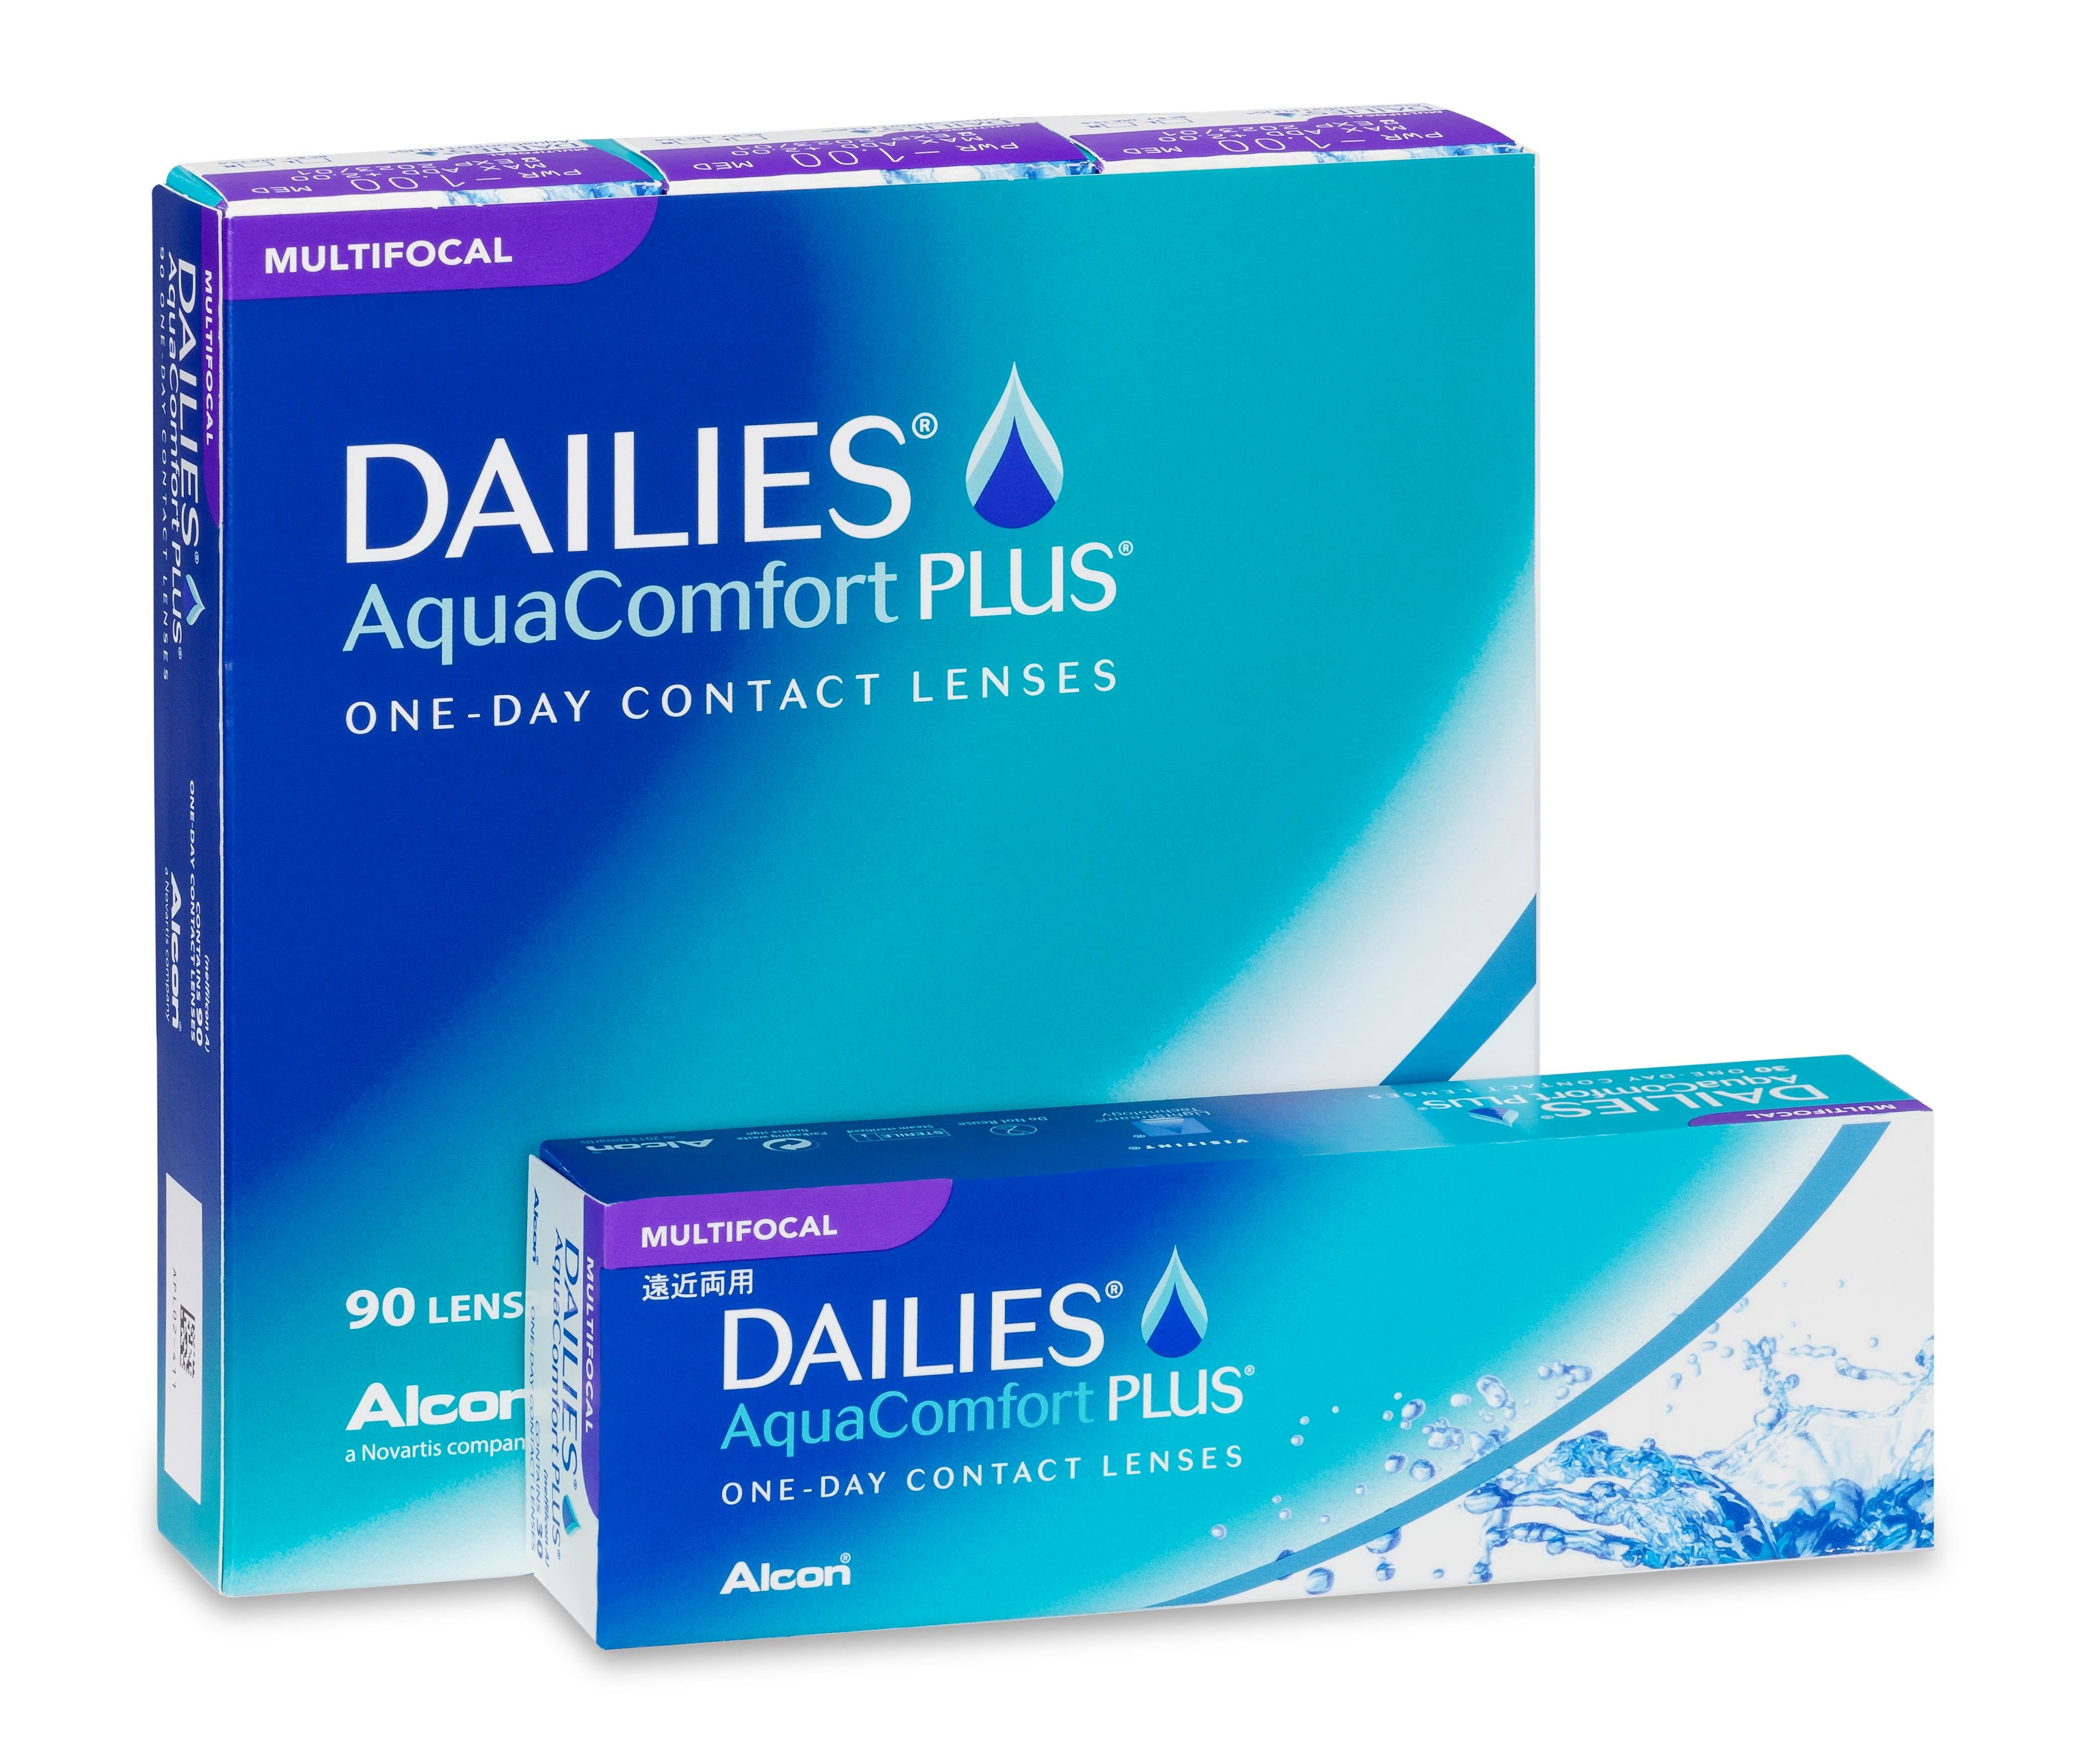 dailies-aquacomfort-plus-multifocal-affordable-daily-monthly-contact